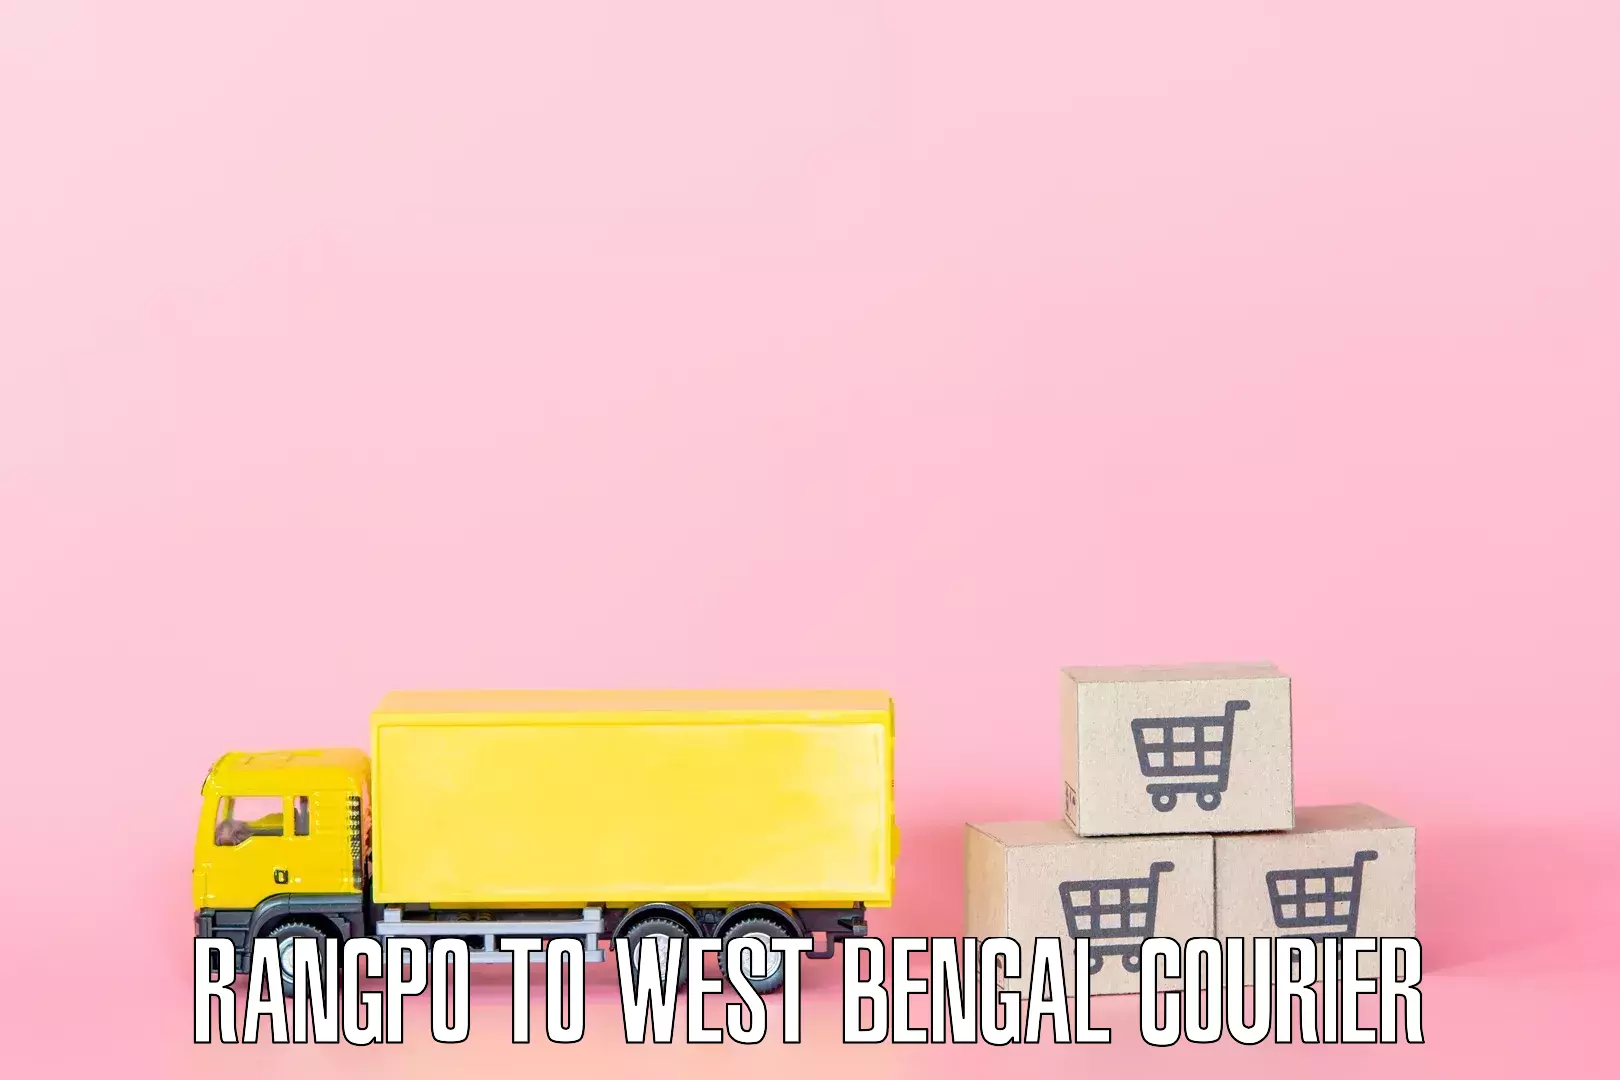 Home relocation experts Rangpo to West Bengal